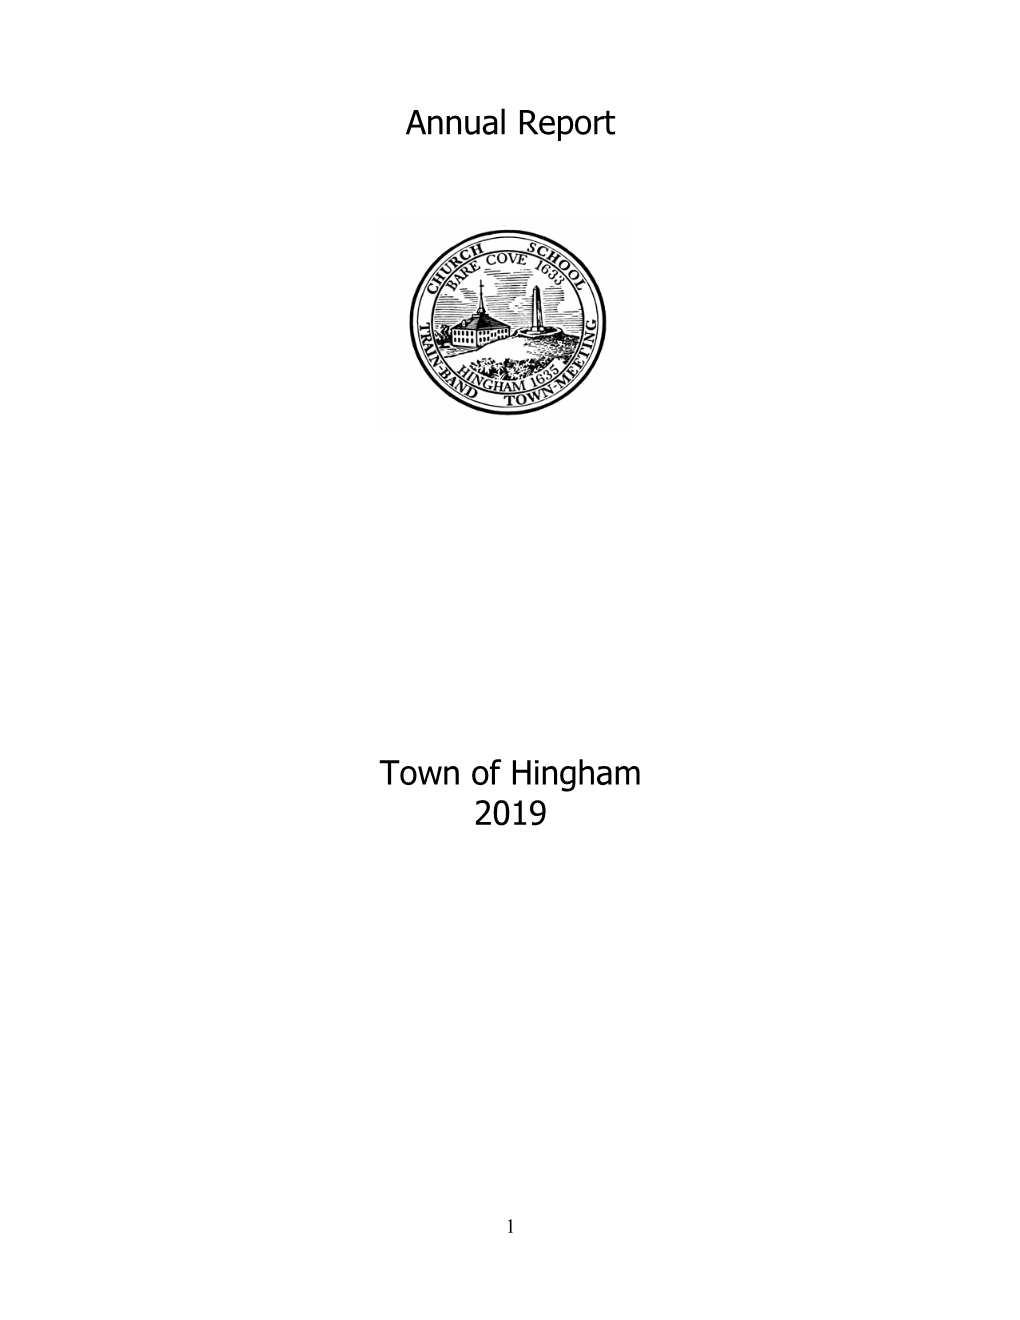 Annual Report Town of Hingham 2019